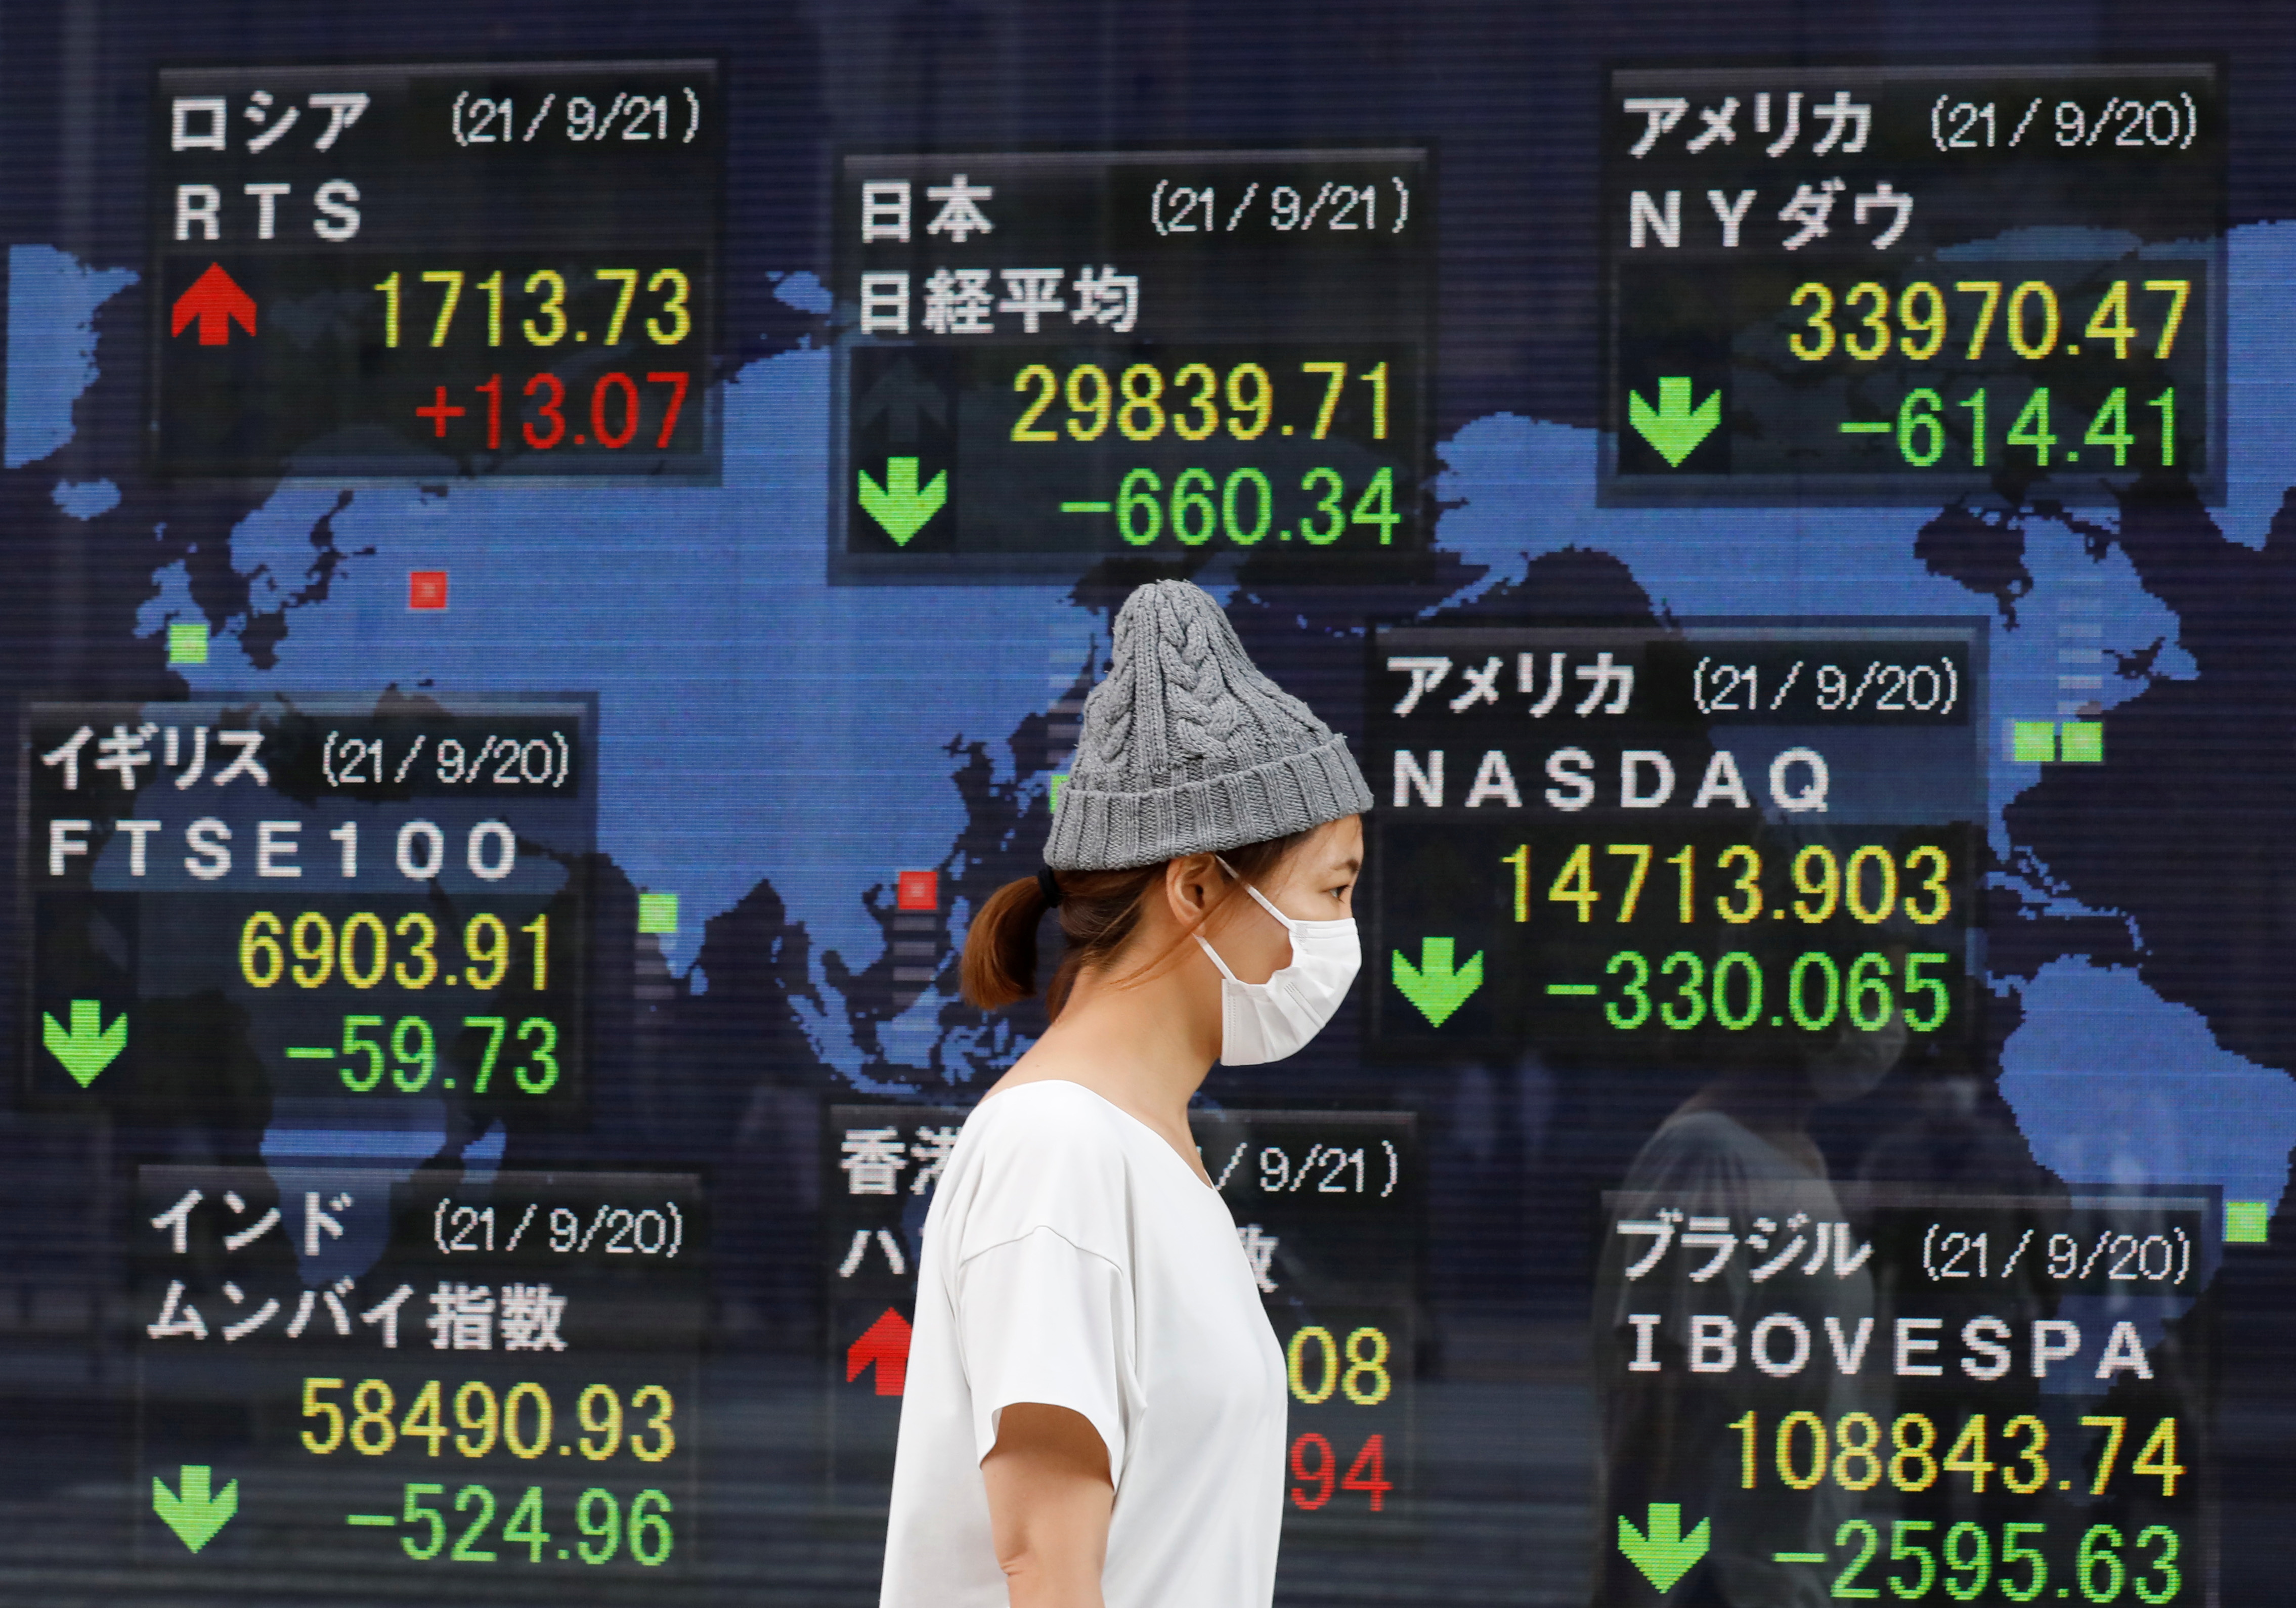 A woman wearing a protective mask, amid the COVID-19 outbreak, walks past an electronic board displaying Japan and other countries' stock indexes outside a brokerage in Tokyo, Japan, September 21, 2021. REUTERS/Kim Kyung-Hoon